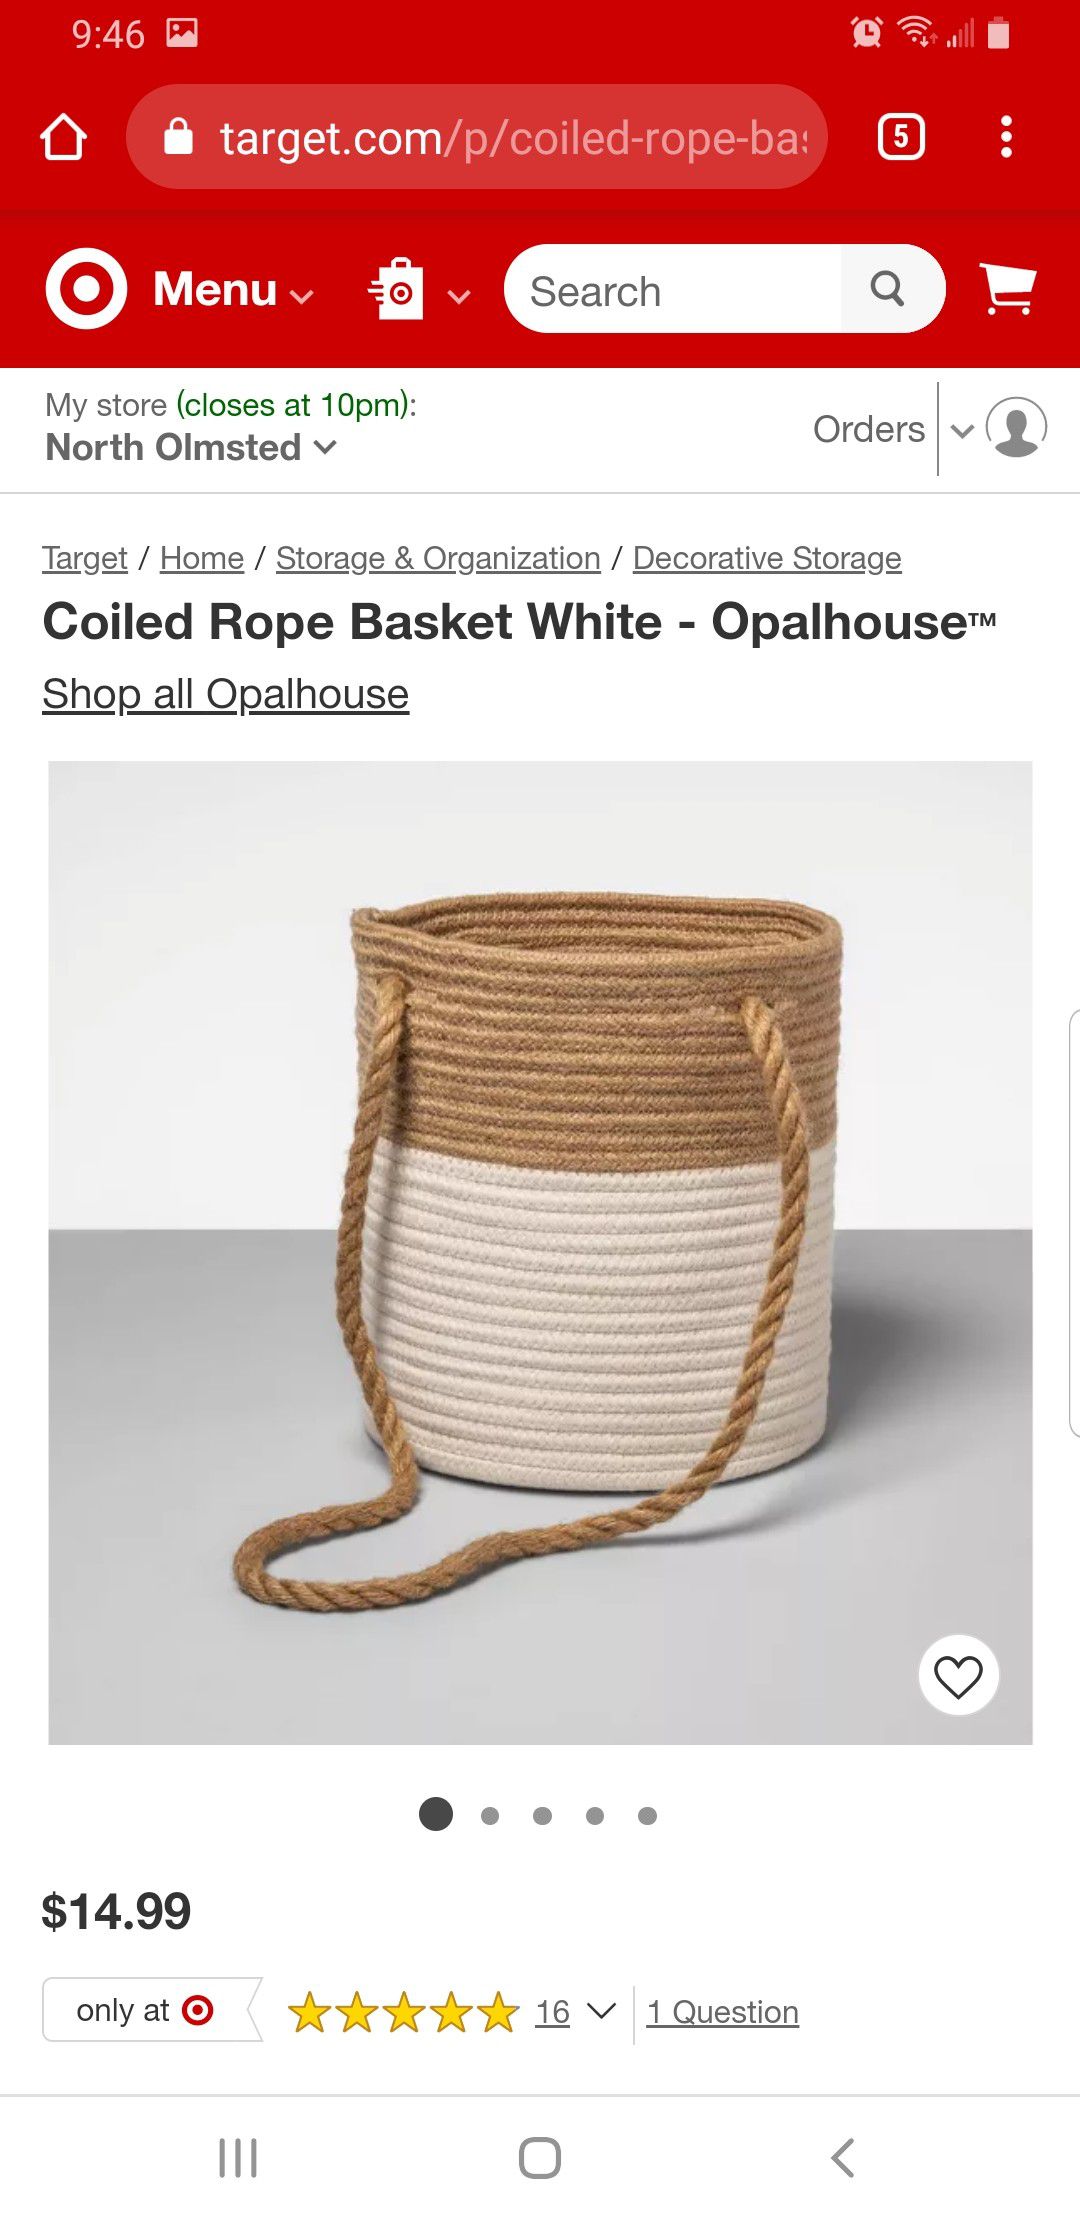 Coiled Rope Basket White - Opalhouse™